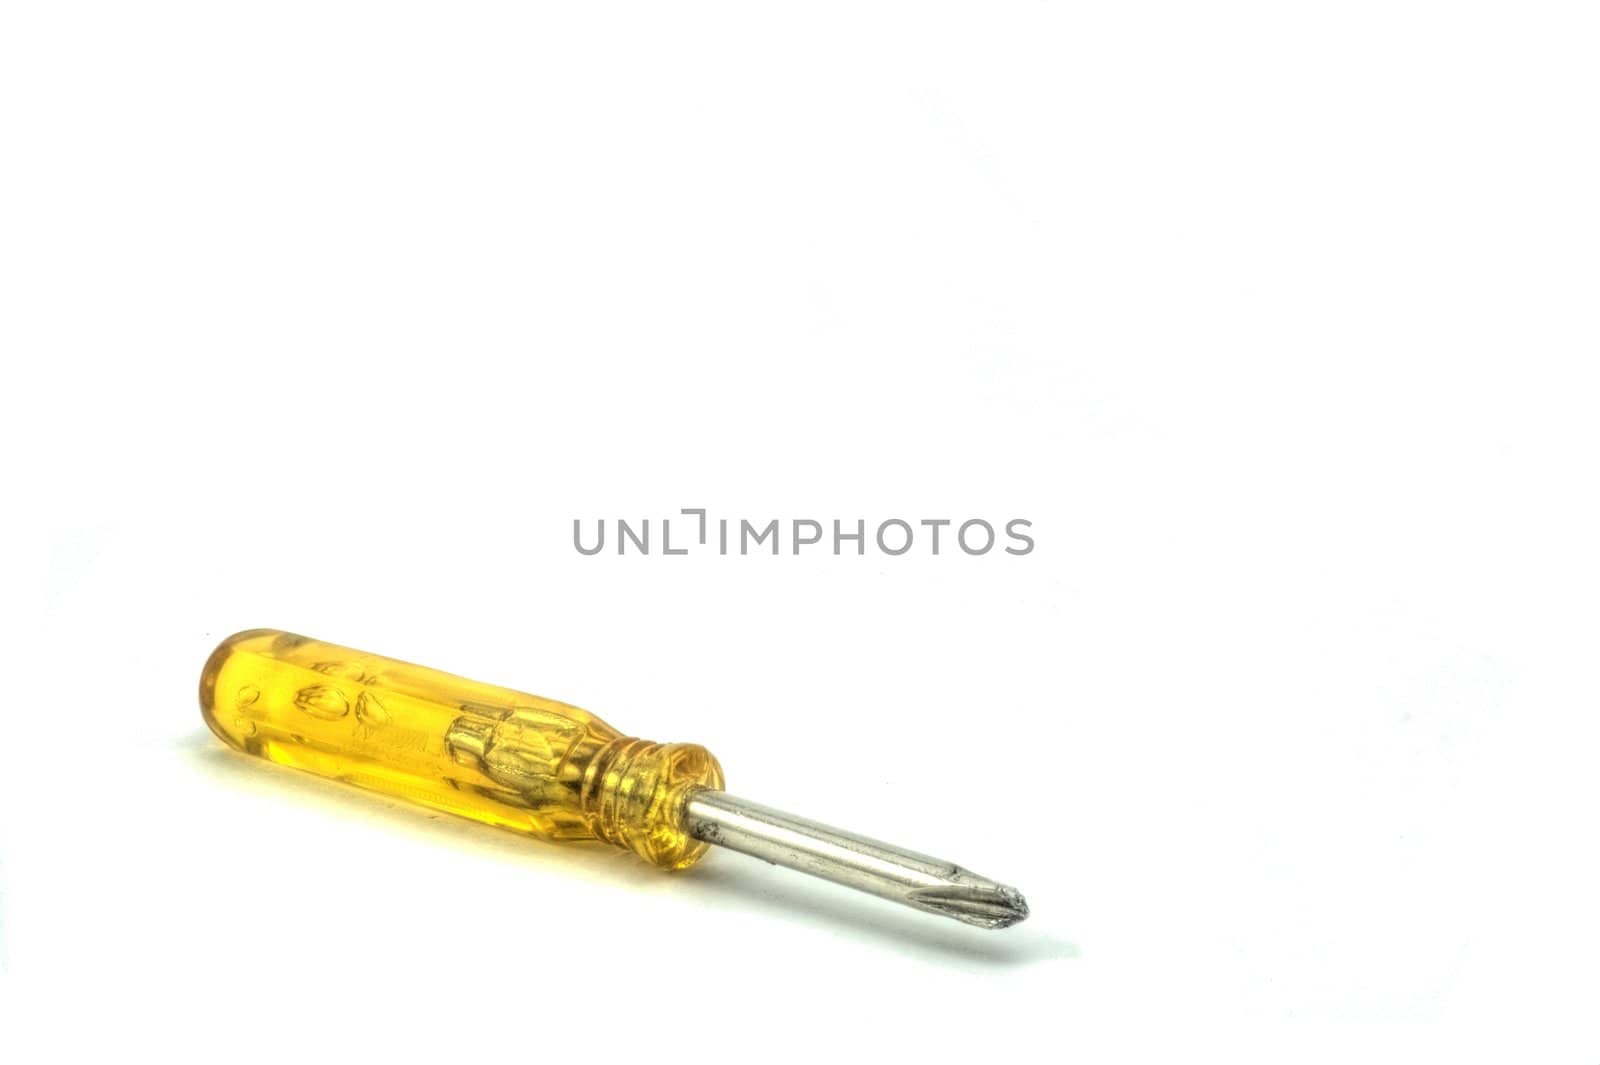 A Small hand tool isolated on a white background